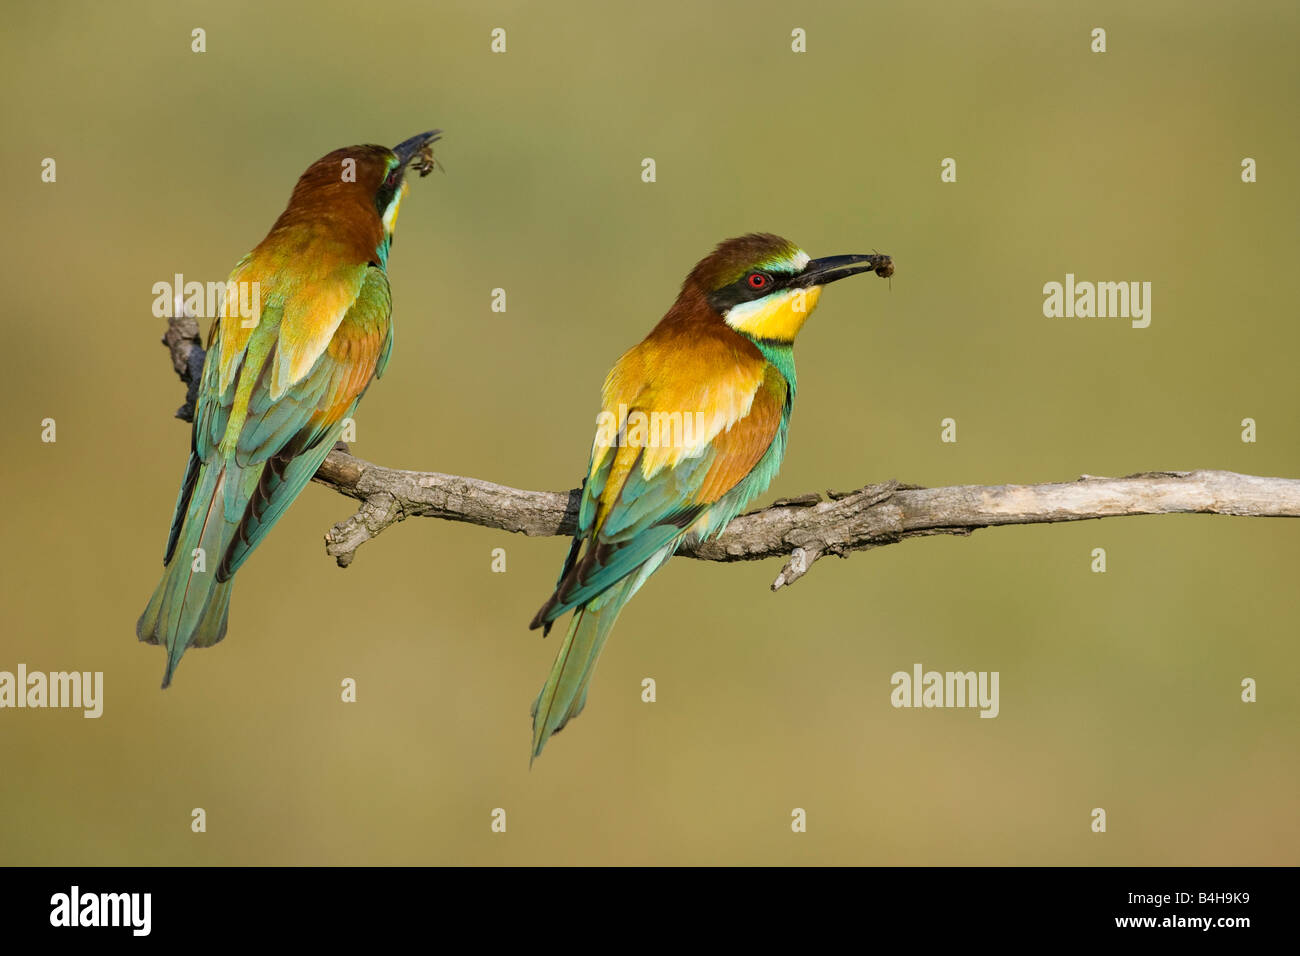 Close-up of two European Bee-eaters (Merops apiaster) perching on branch with prey in its beak, Hungary Stock Photo